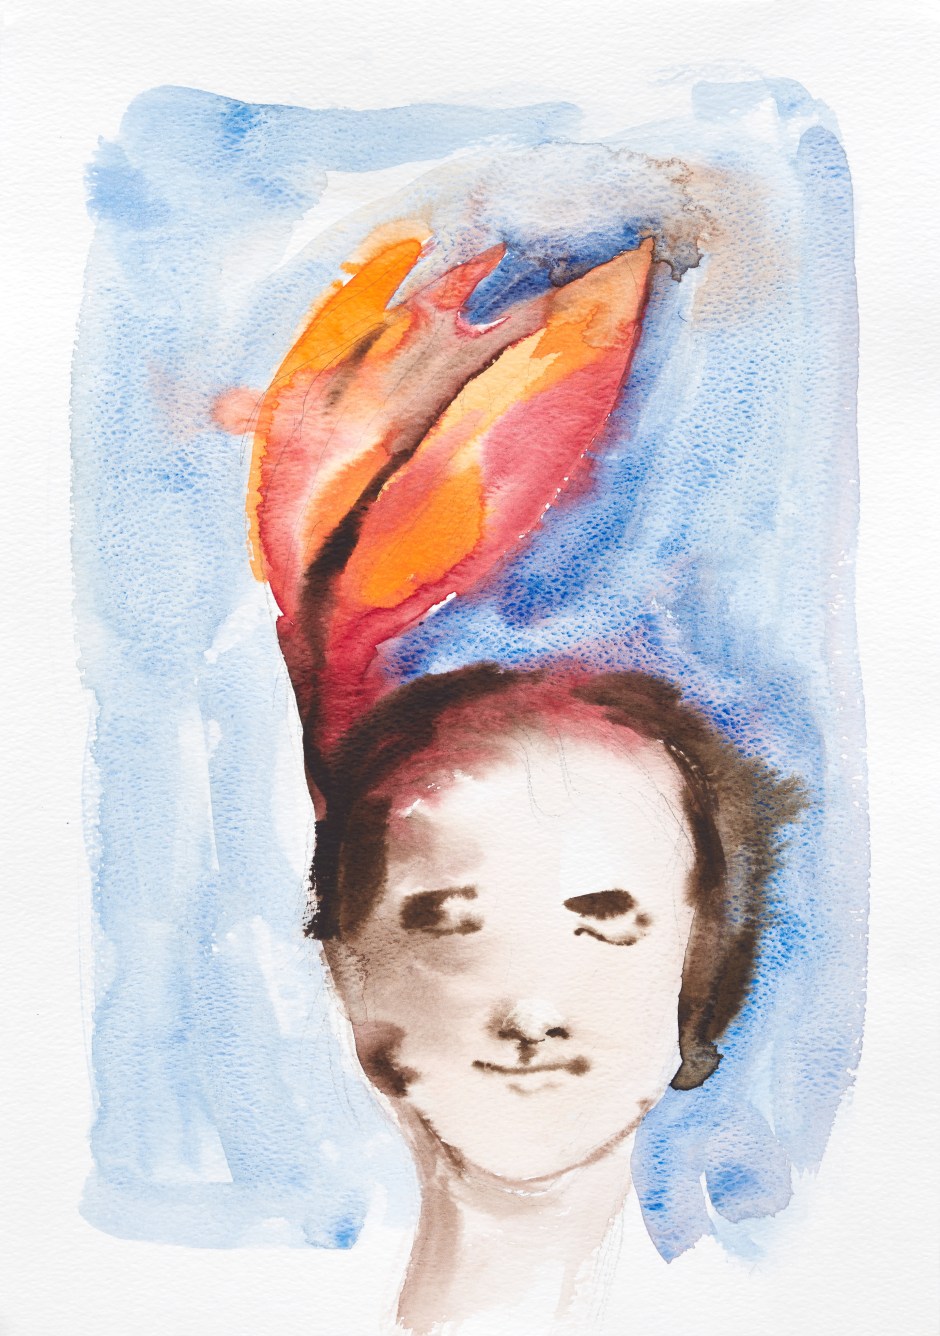 Flower Child, 2020  watercolour and pencil on paper  42 × 29.7 cm  16.5 × 11.7 in